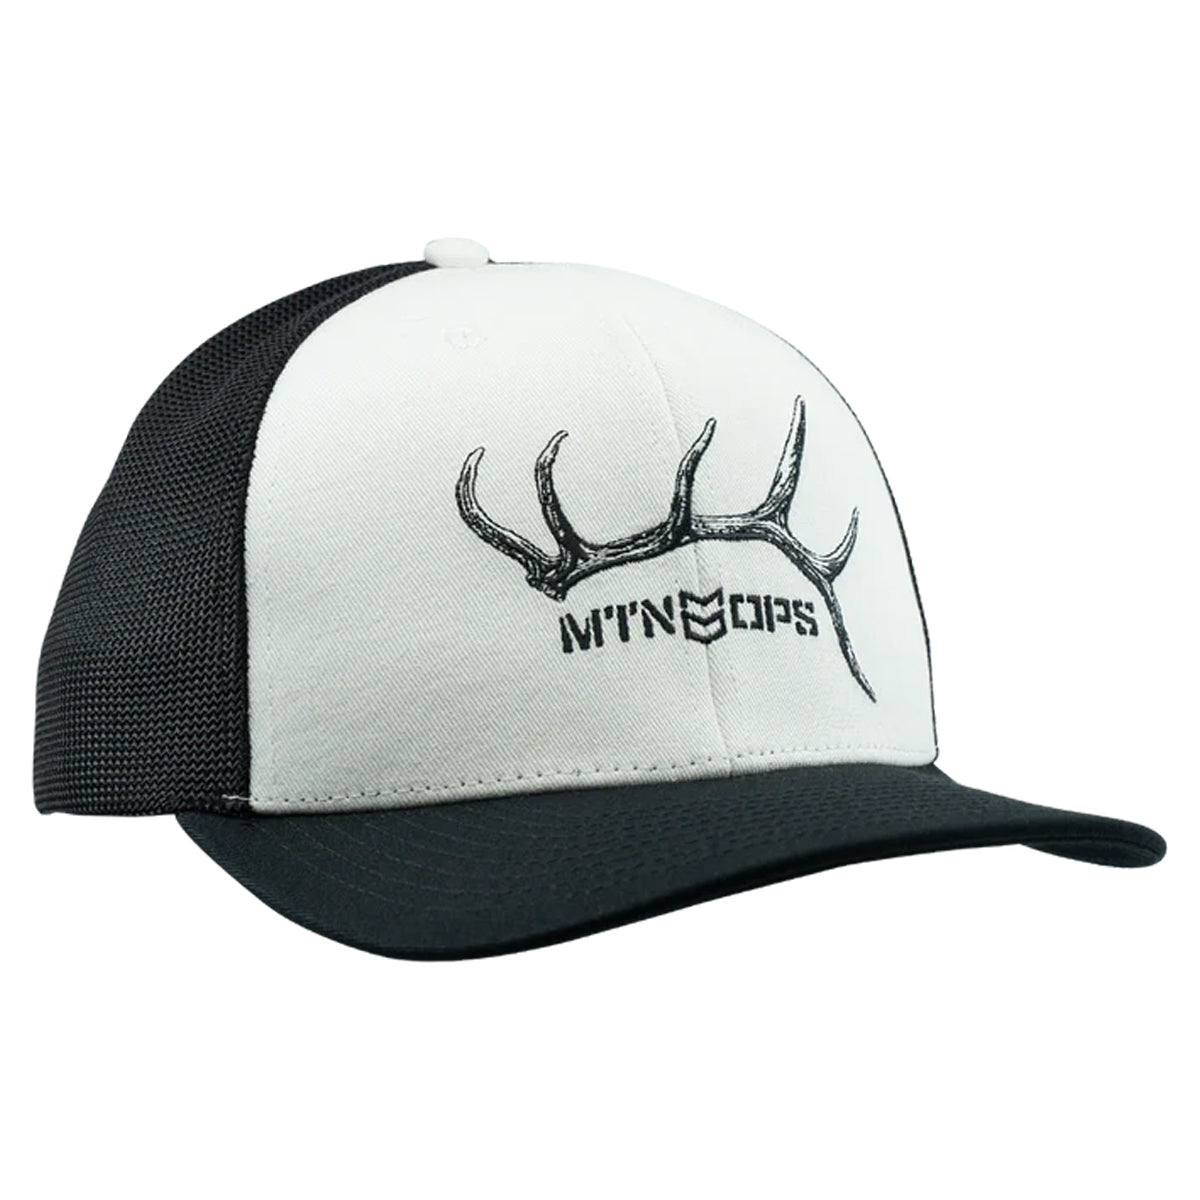 MTN OPS Single Six Hat in White by GOHUNT | Mtn Ops - GOHUNT Shop